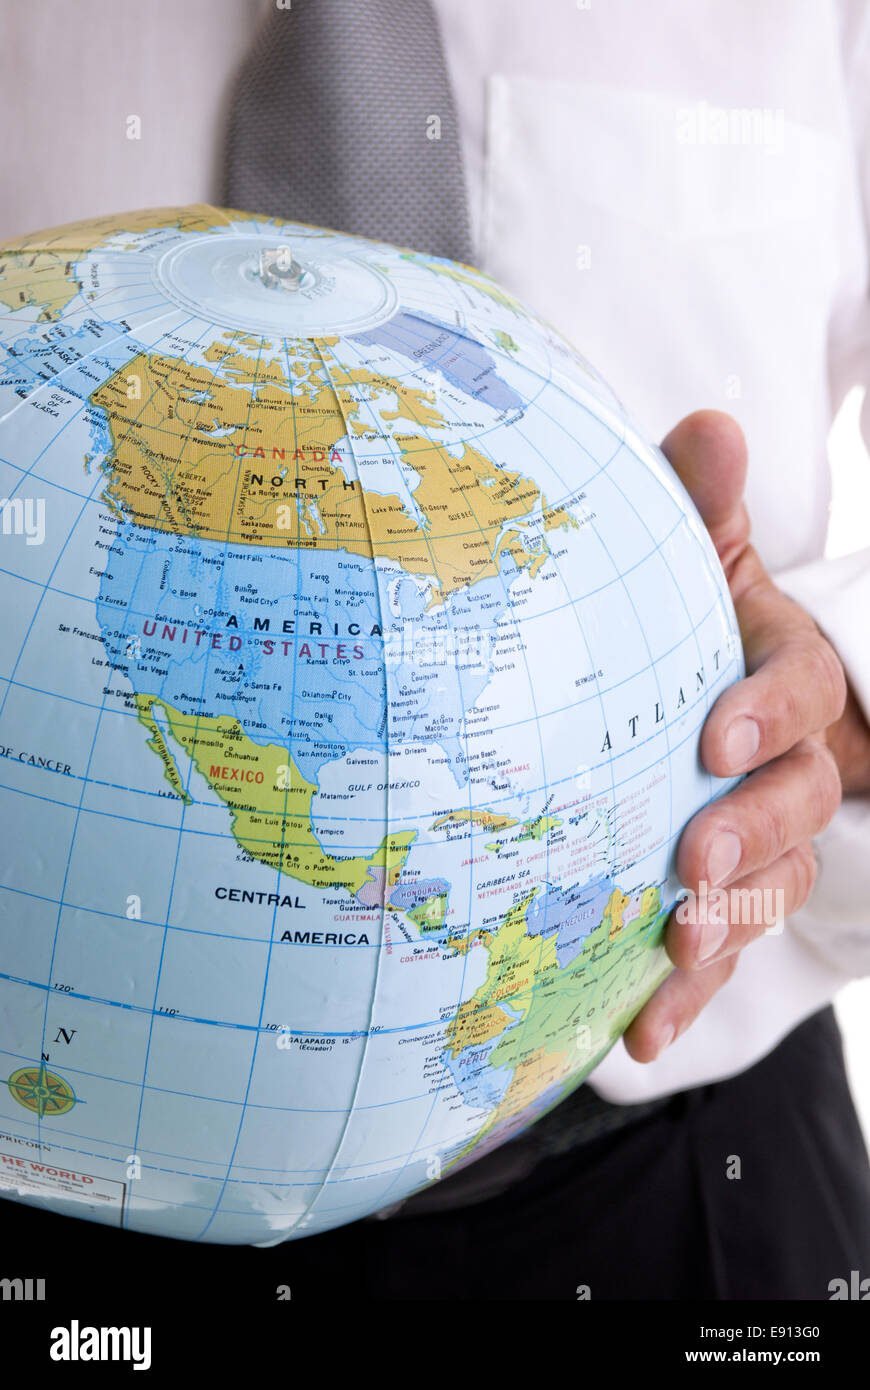 Man holding a globe in his hand Stock Photo